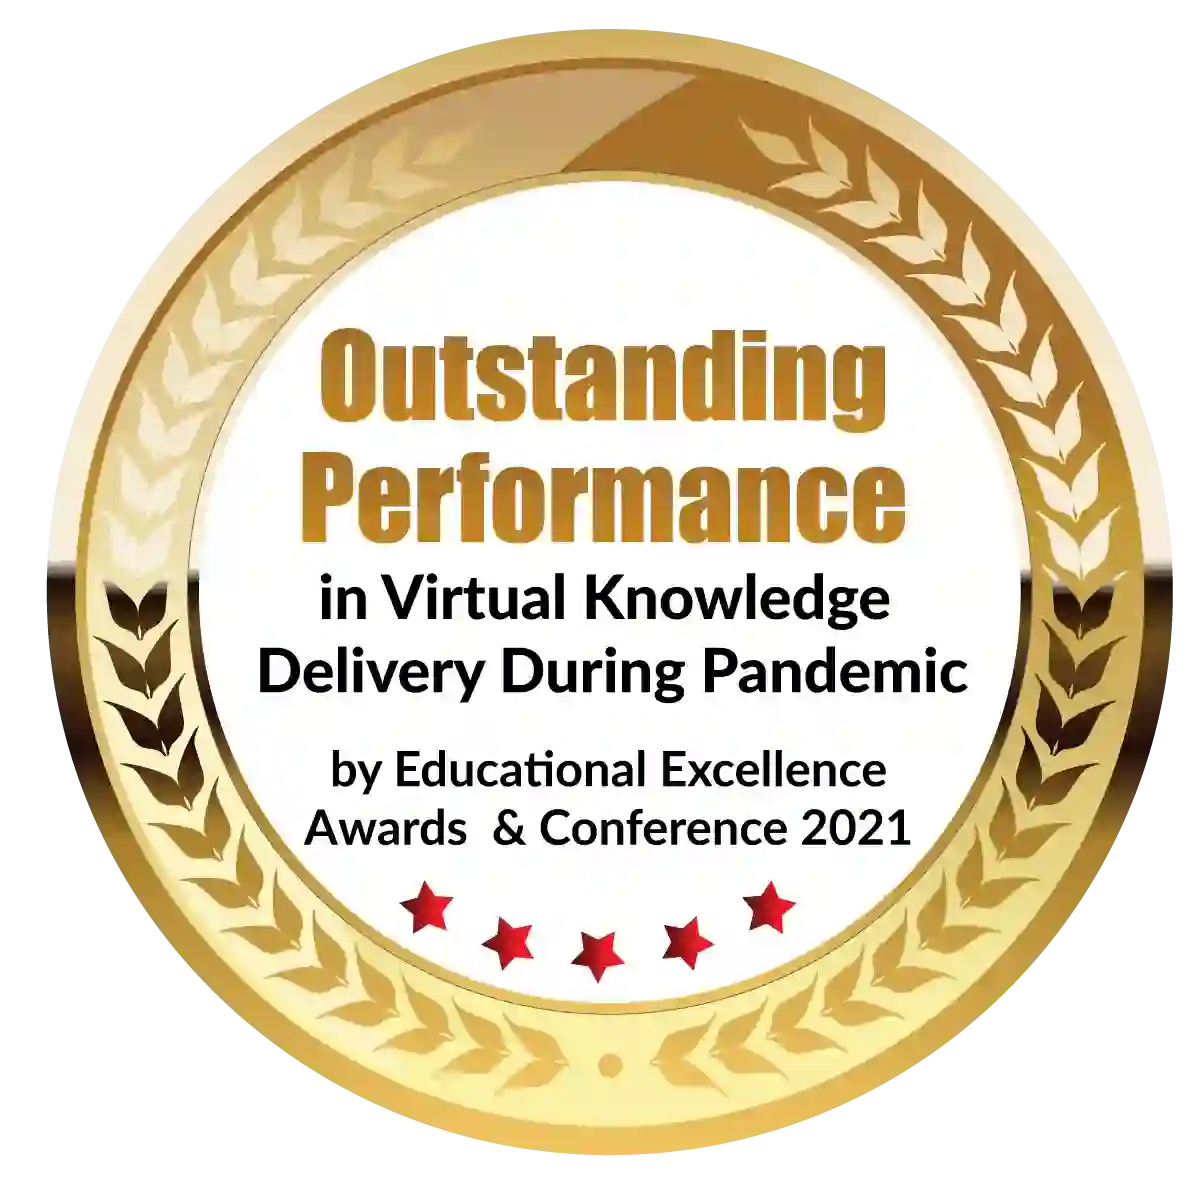 by Educational Excellence Awards & Conference 2021